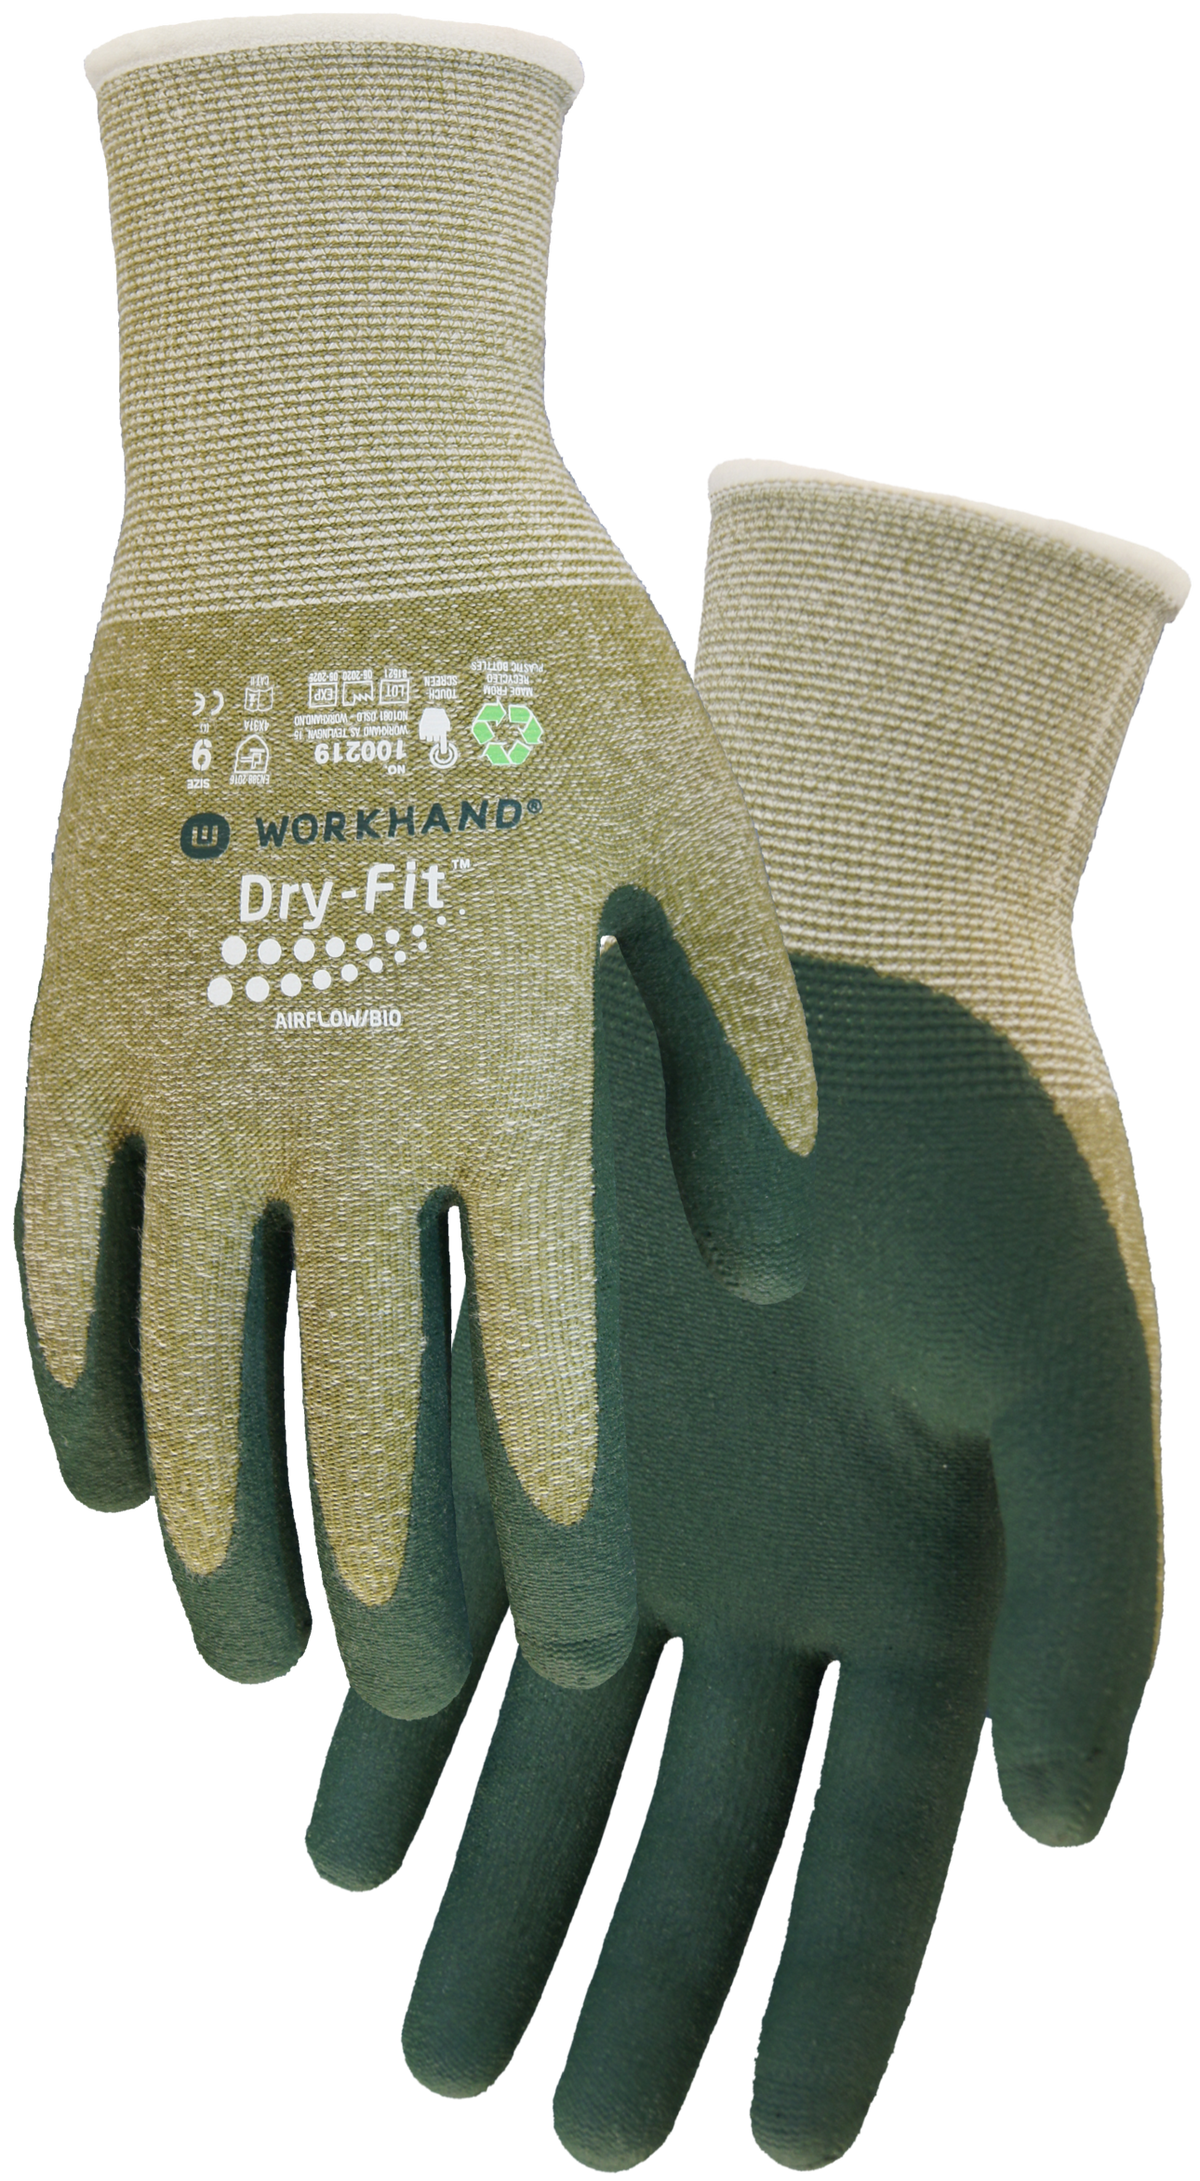 Workhand® Dry-Fit Airflow/BIO (608985)